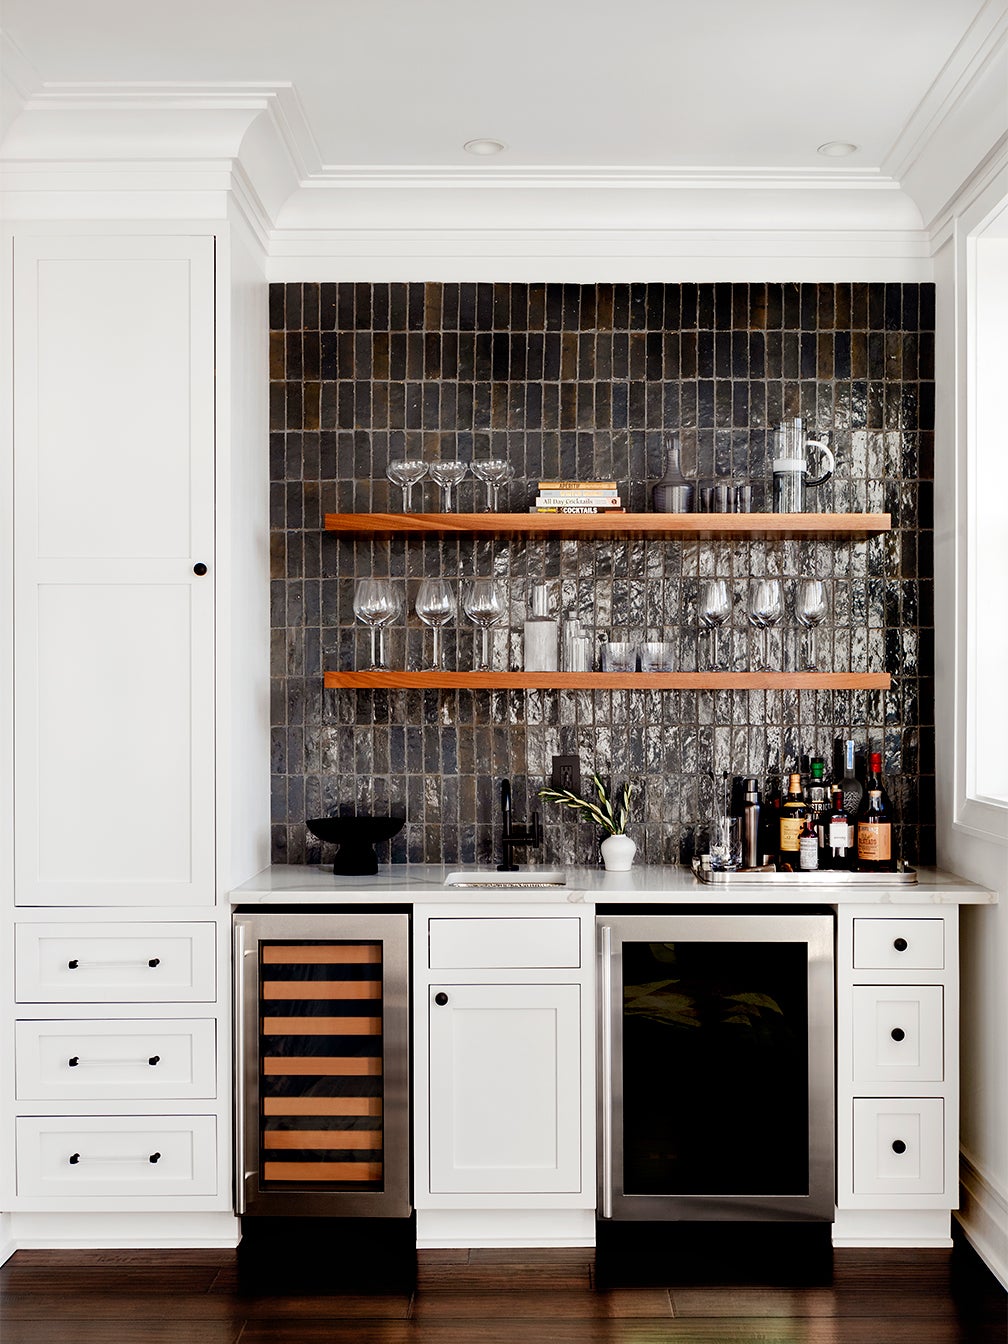 Bar with wooden shelving and black tile